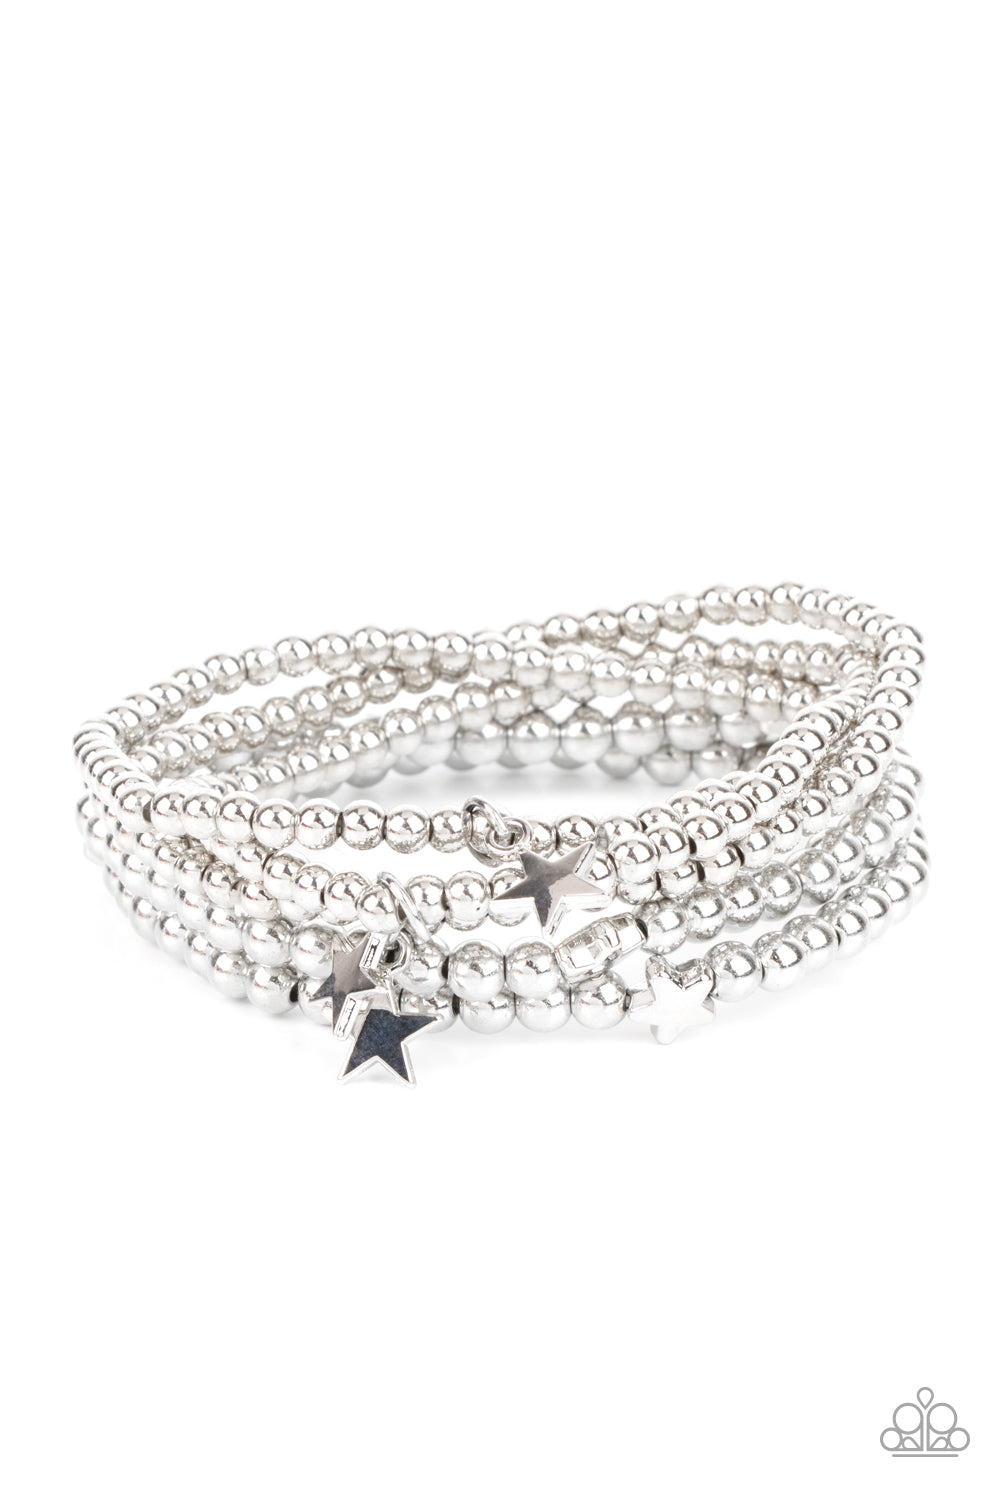 Paparazzi American All-Star - Silver Bracelet - A Finishing Touch Jewelry